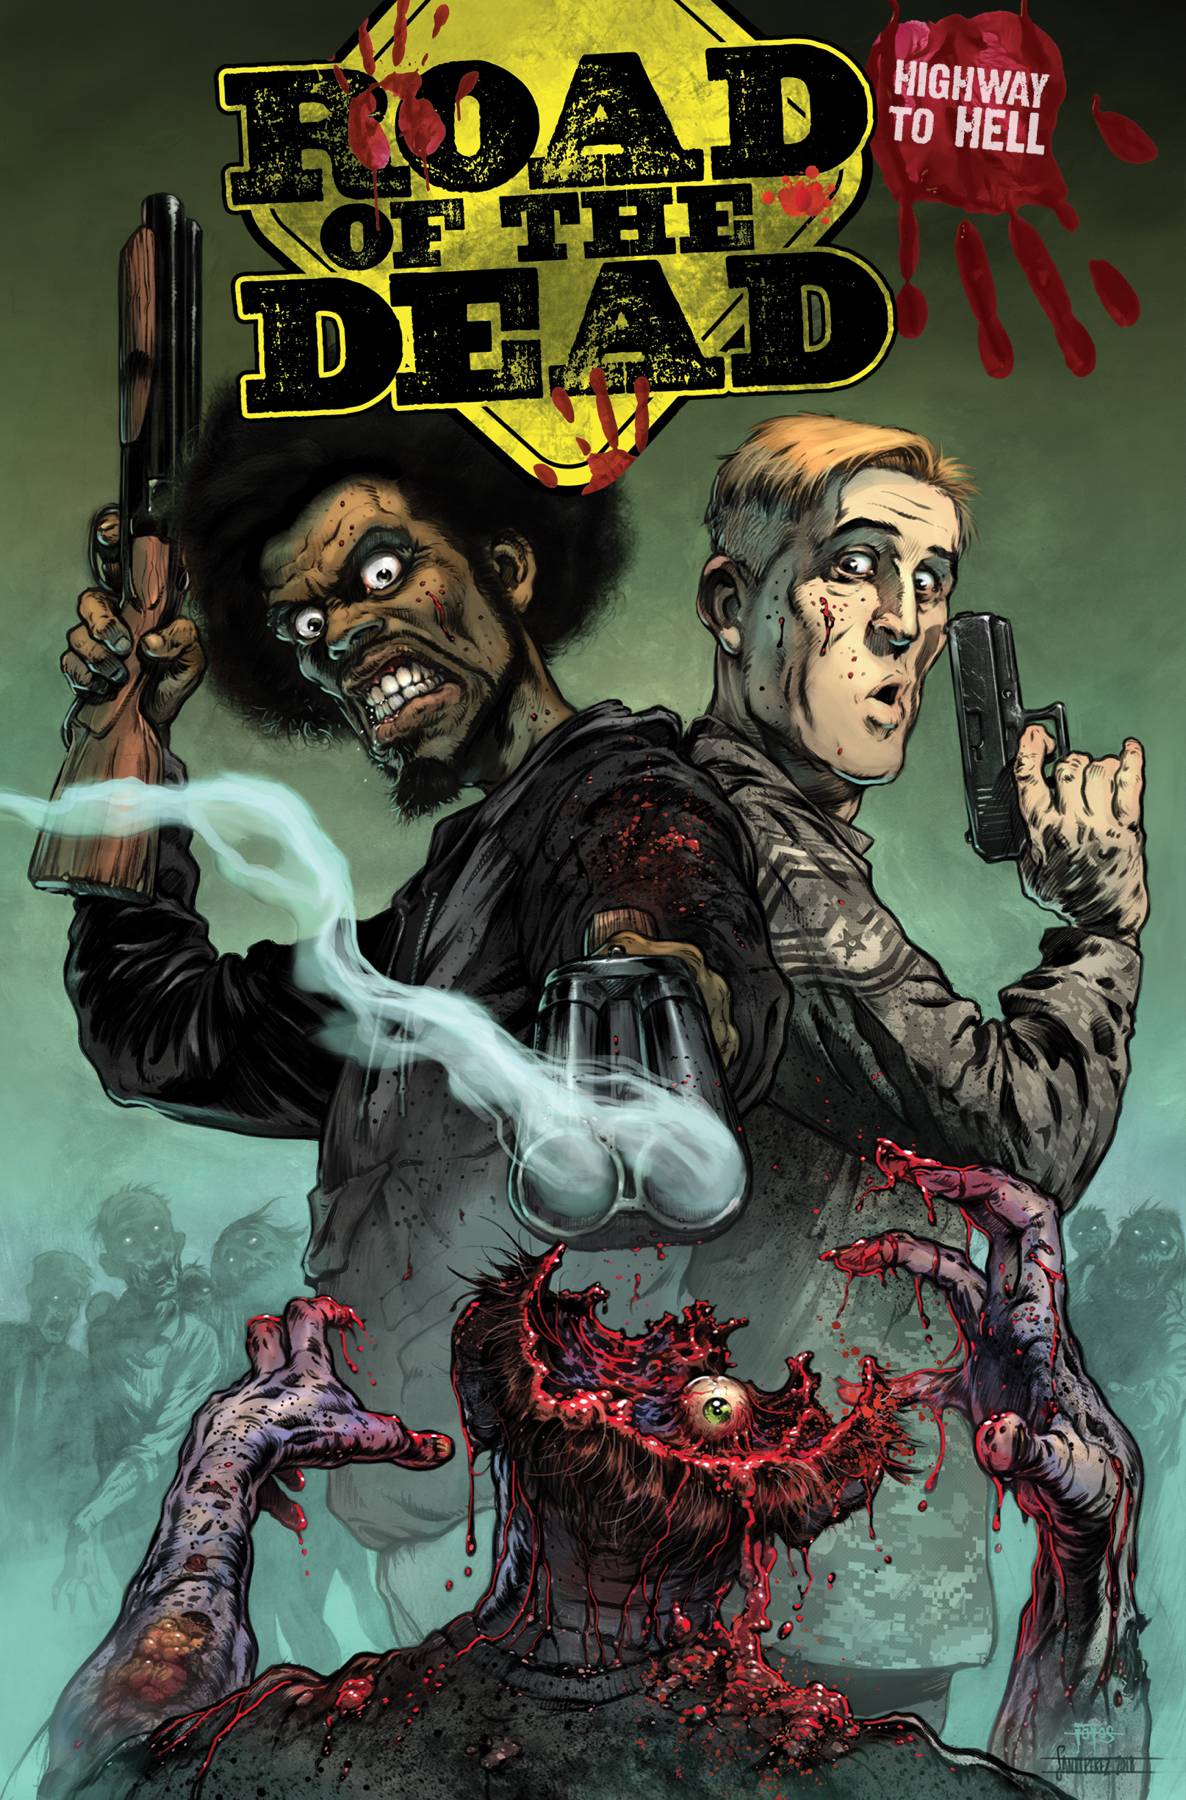 Road of the Dead Highway To Hell Graphic Novel